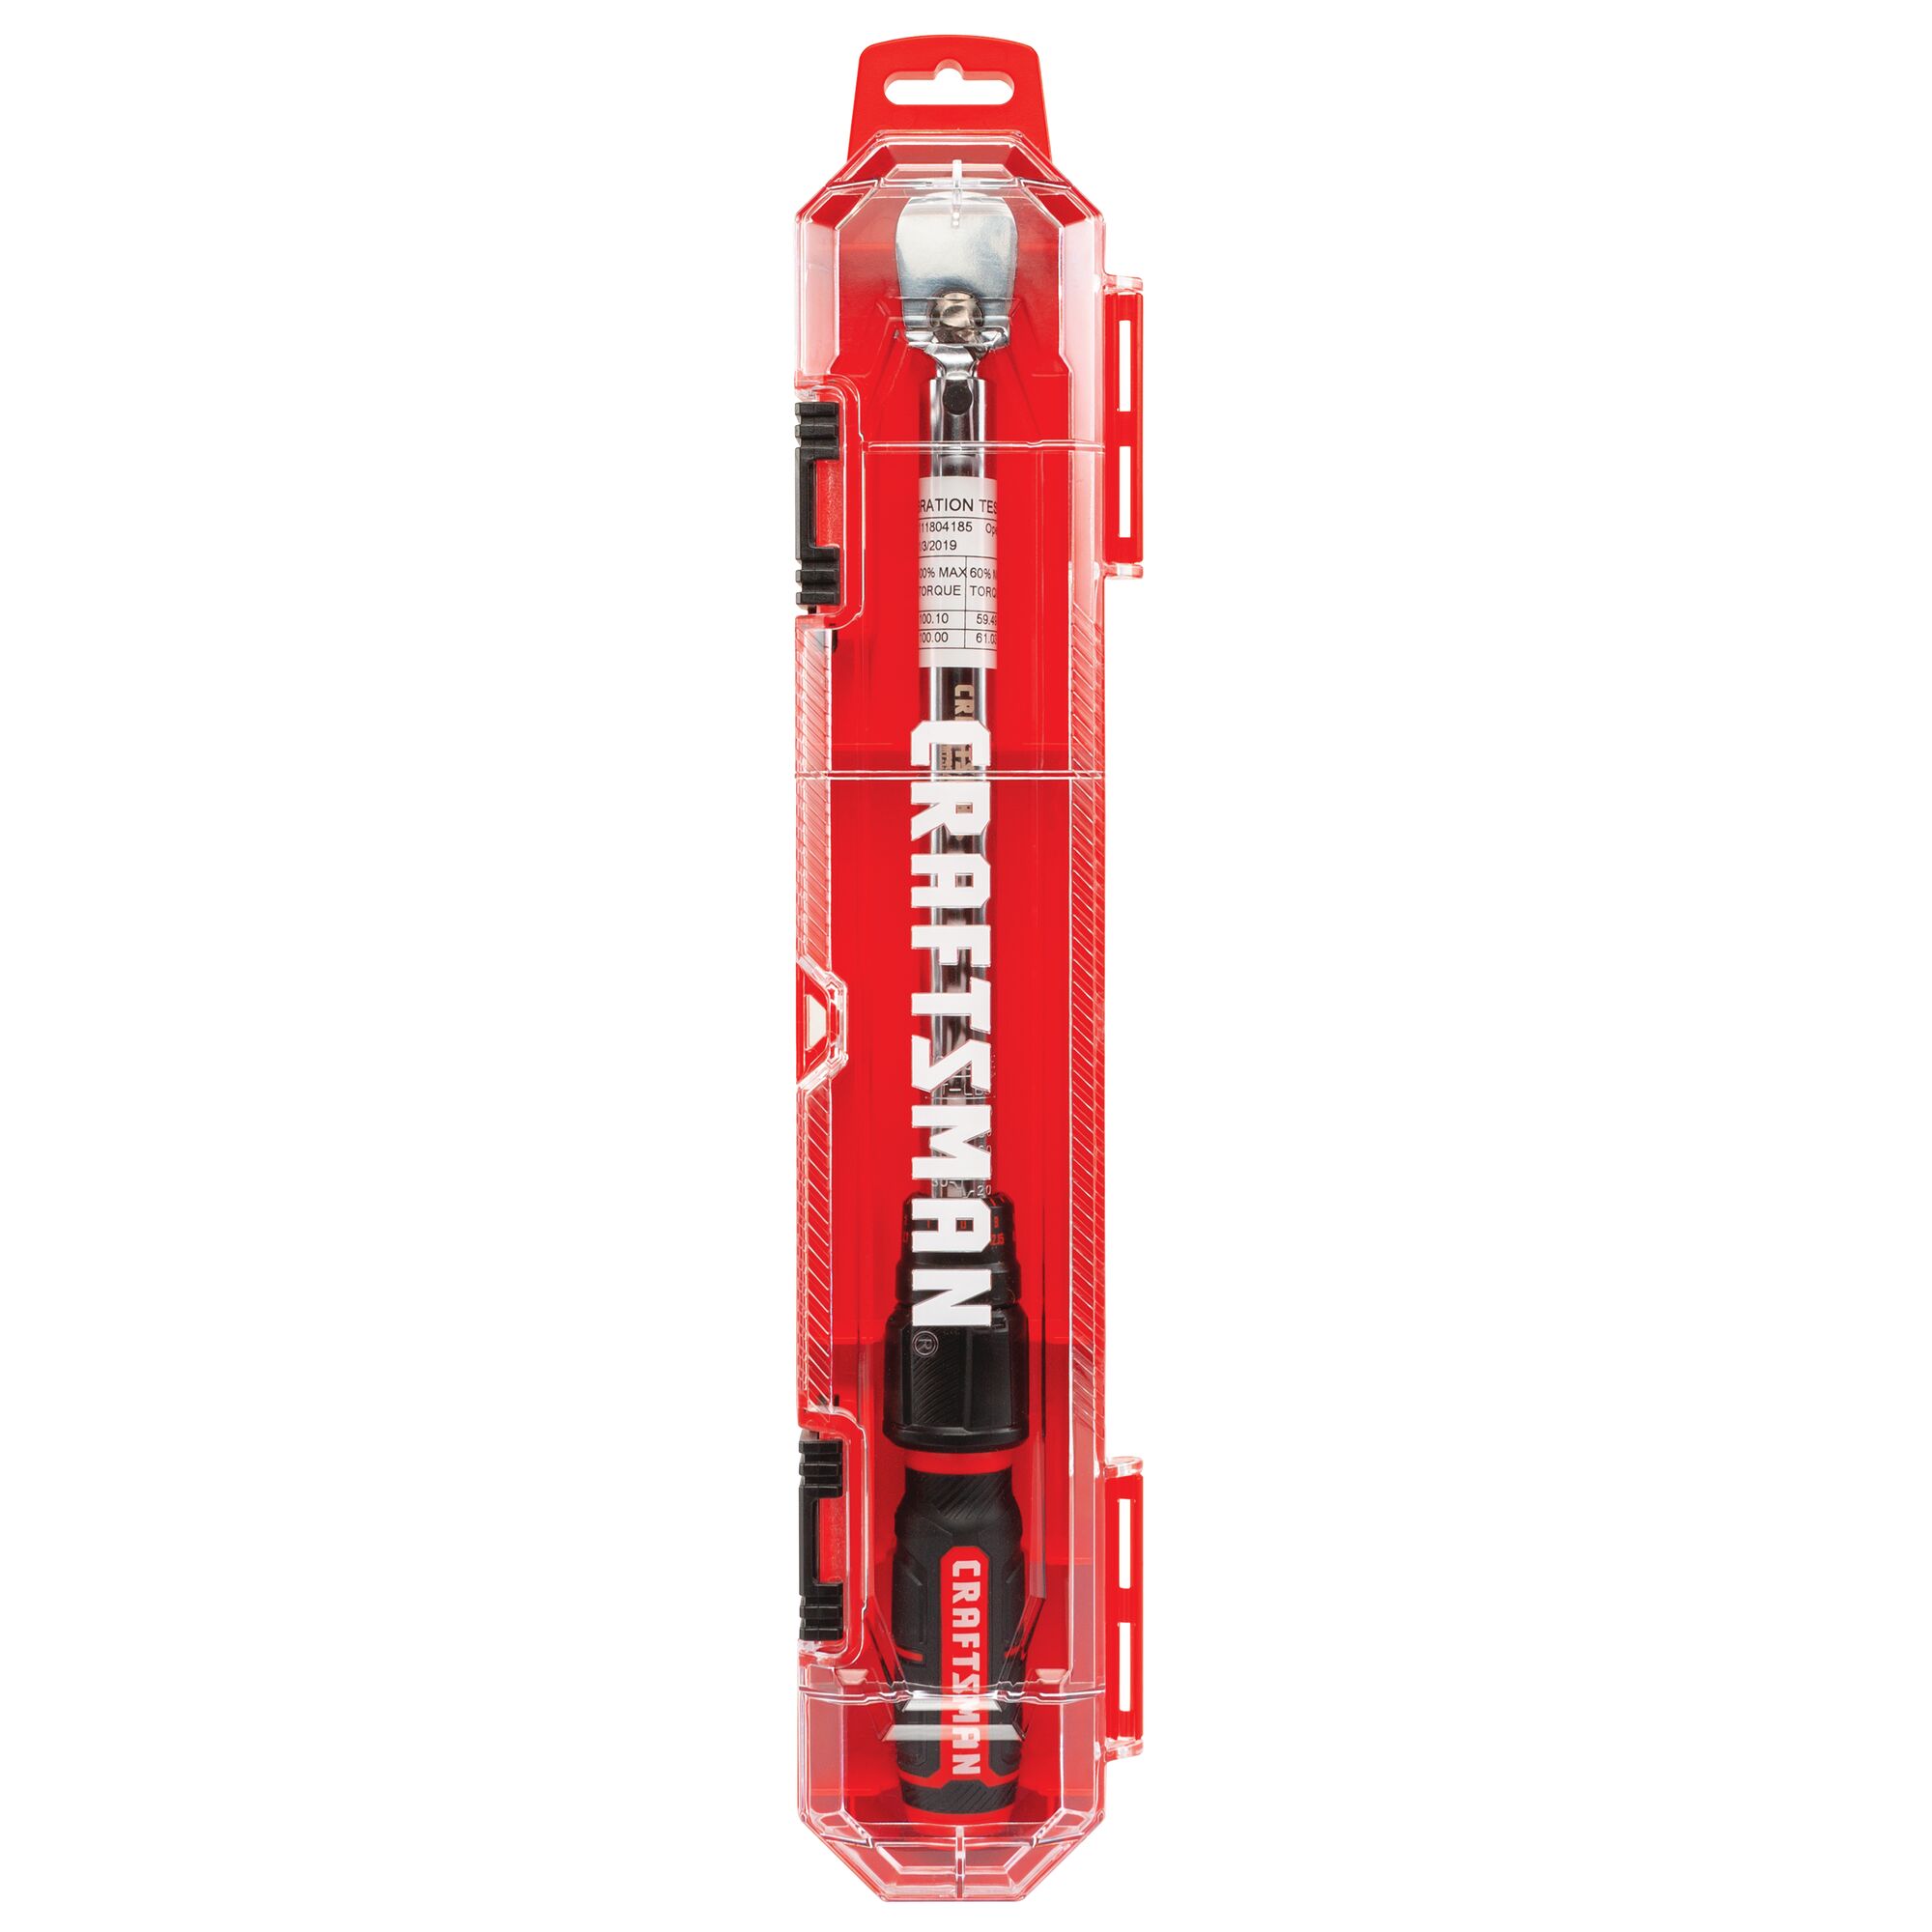 3 eighth inch drive micrometer torque wrench with packaging tag.